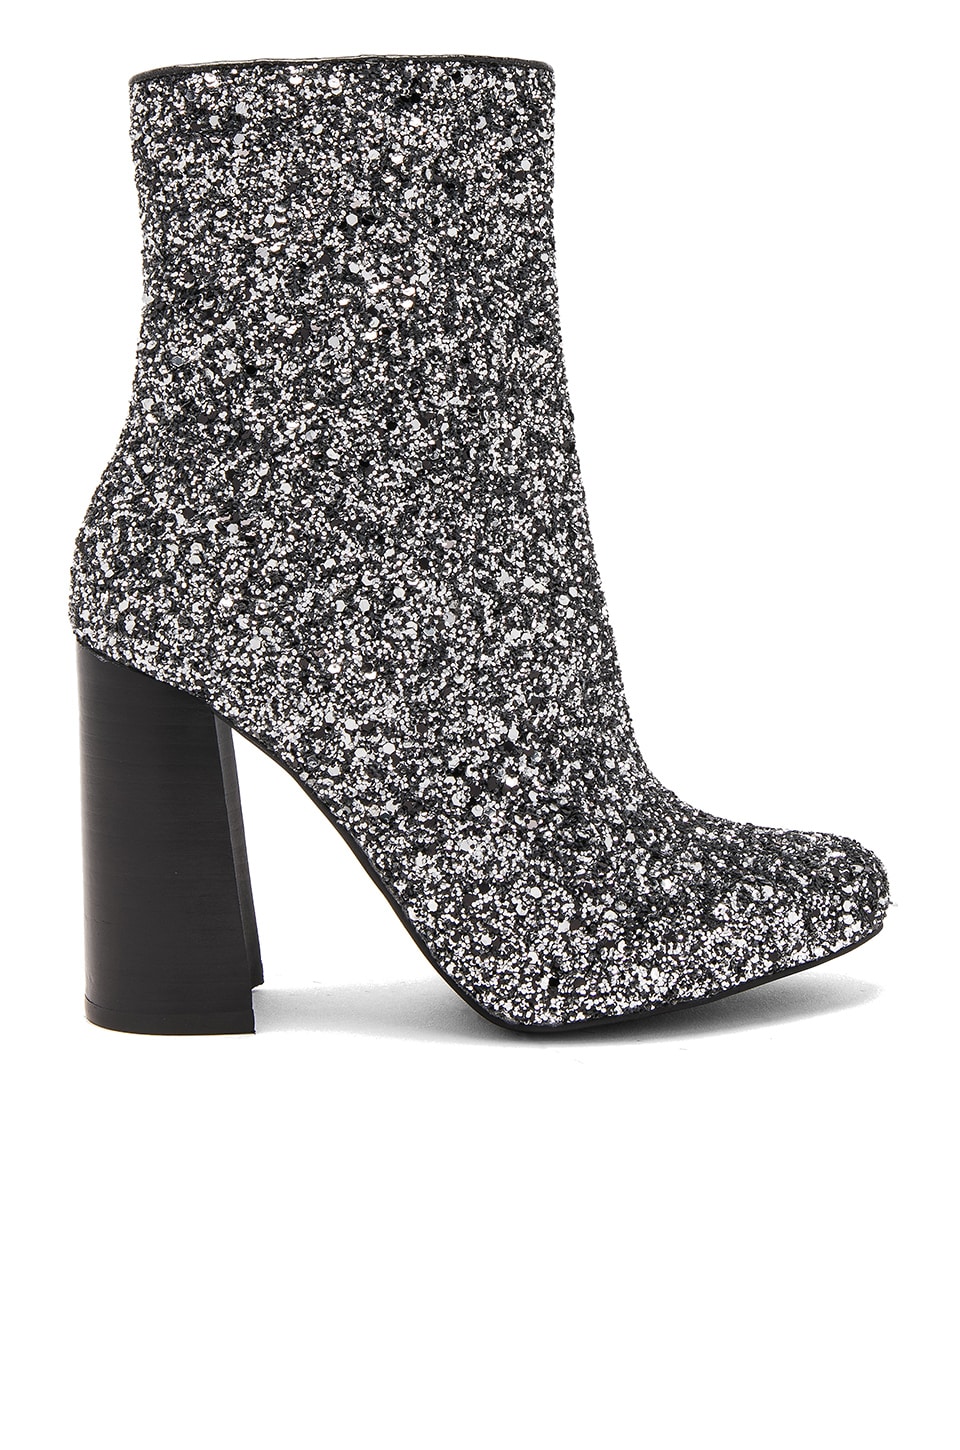 Jeffrey Campbell Stratford 3 Booties in Pewter Glitter | REVOLVE